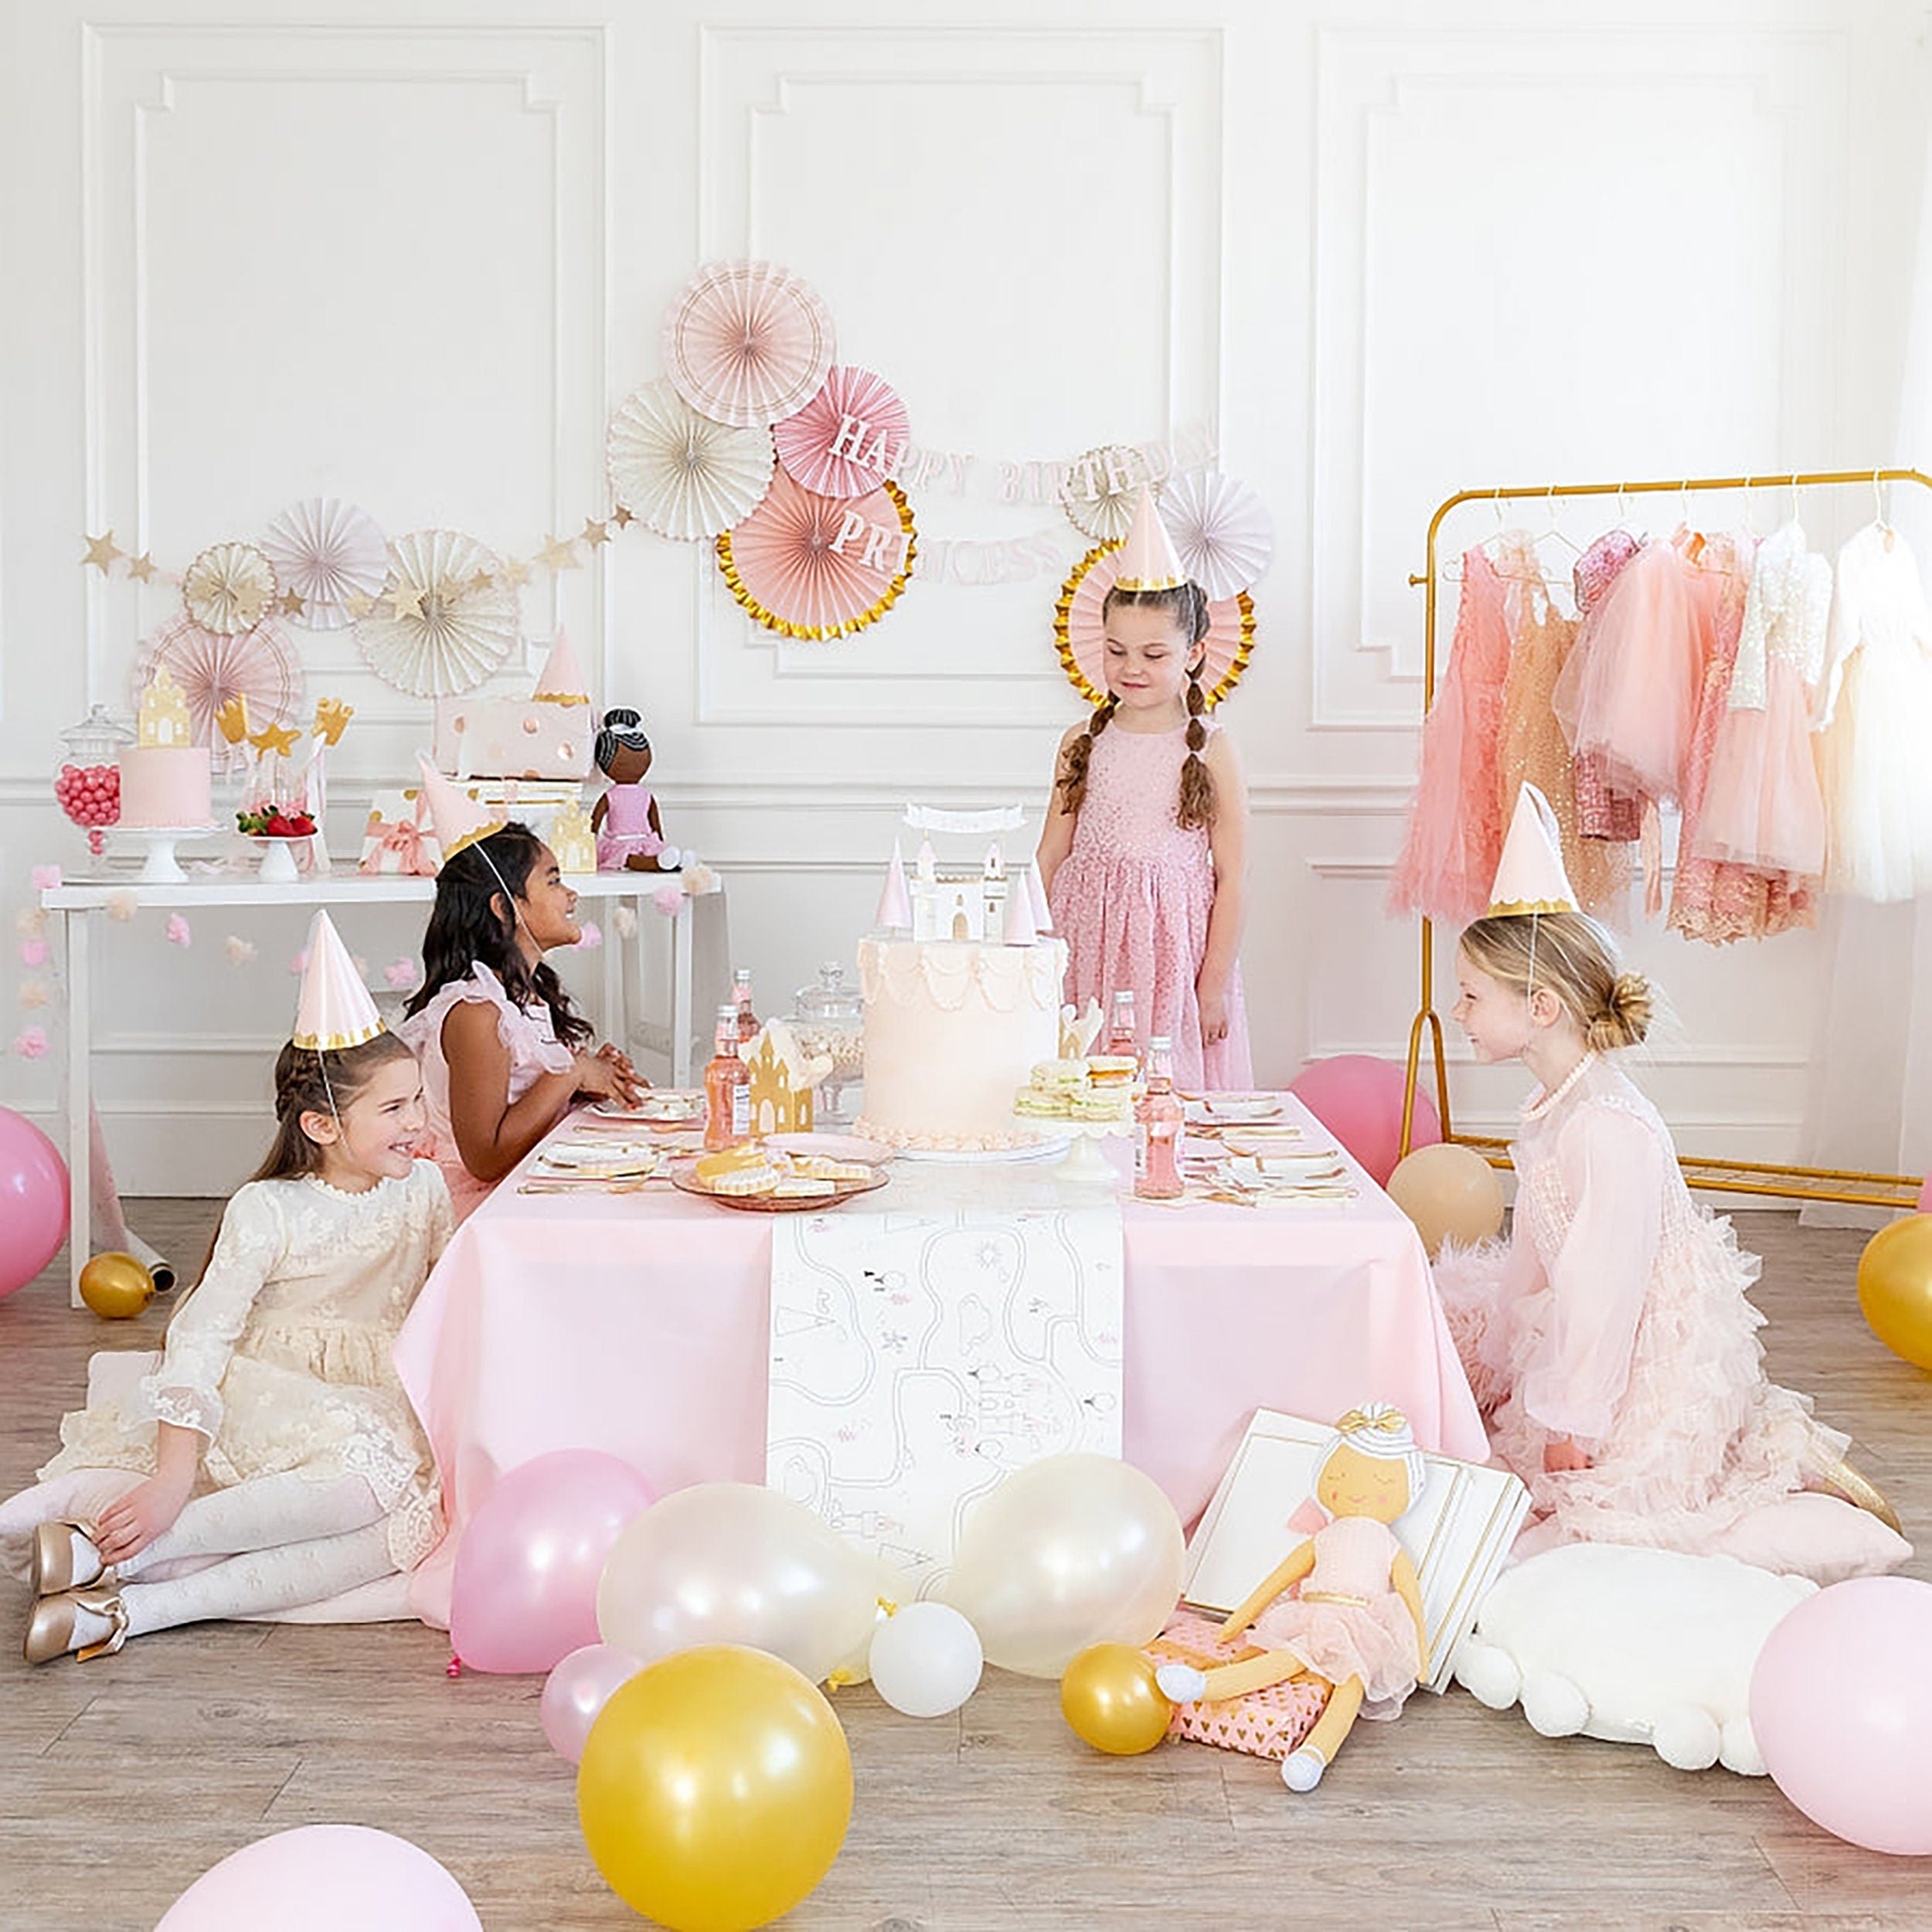 Princess Birthday Party Decorations | Party Fan Decorations - Princess Tea Party  - Pink and Gold Baby Shower - Princess Party Decorations